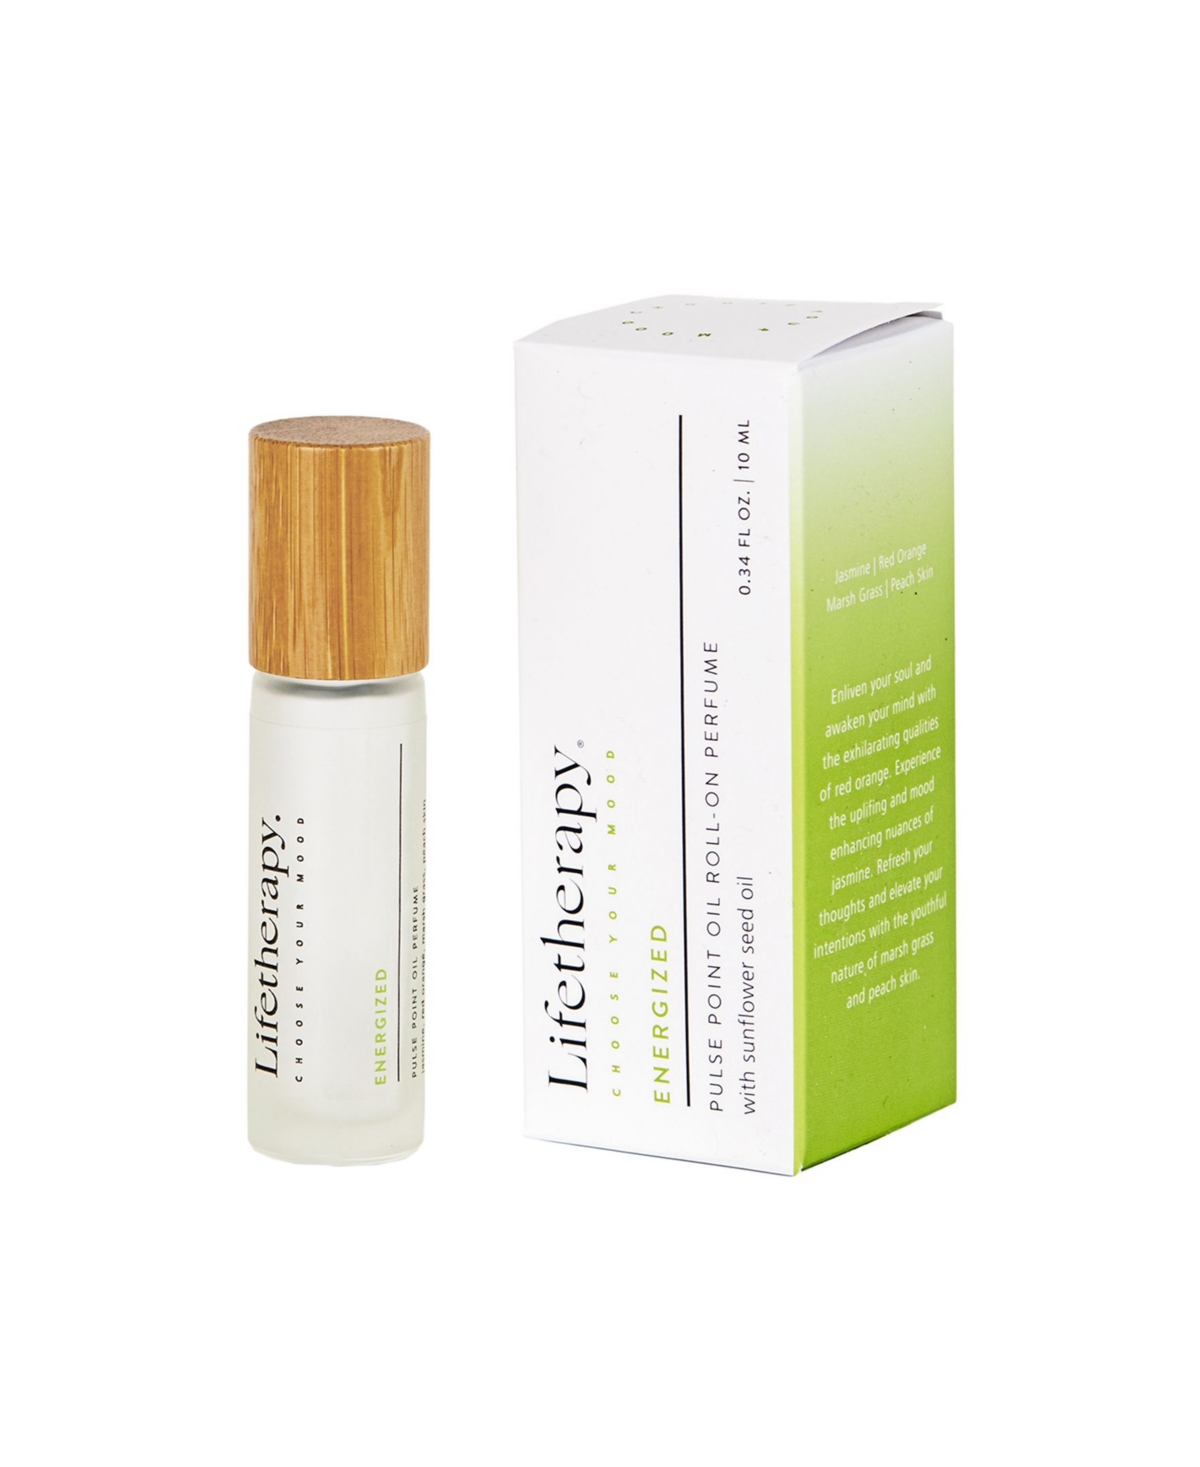 Lifetherapy Energized Pulse Point Oil Roll-On Perfume, 0.34 oz